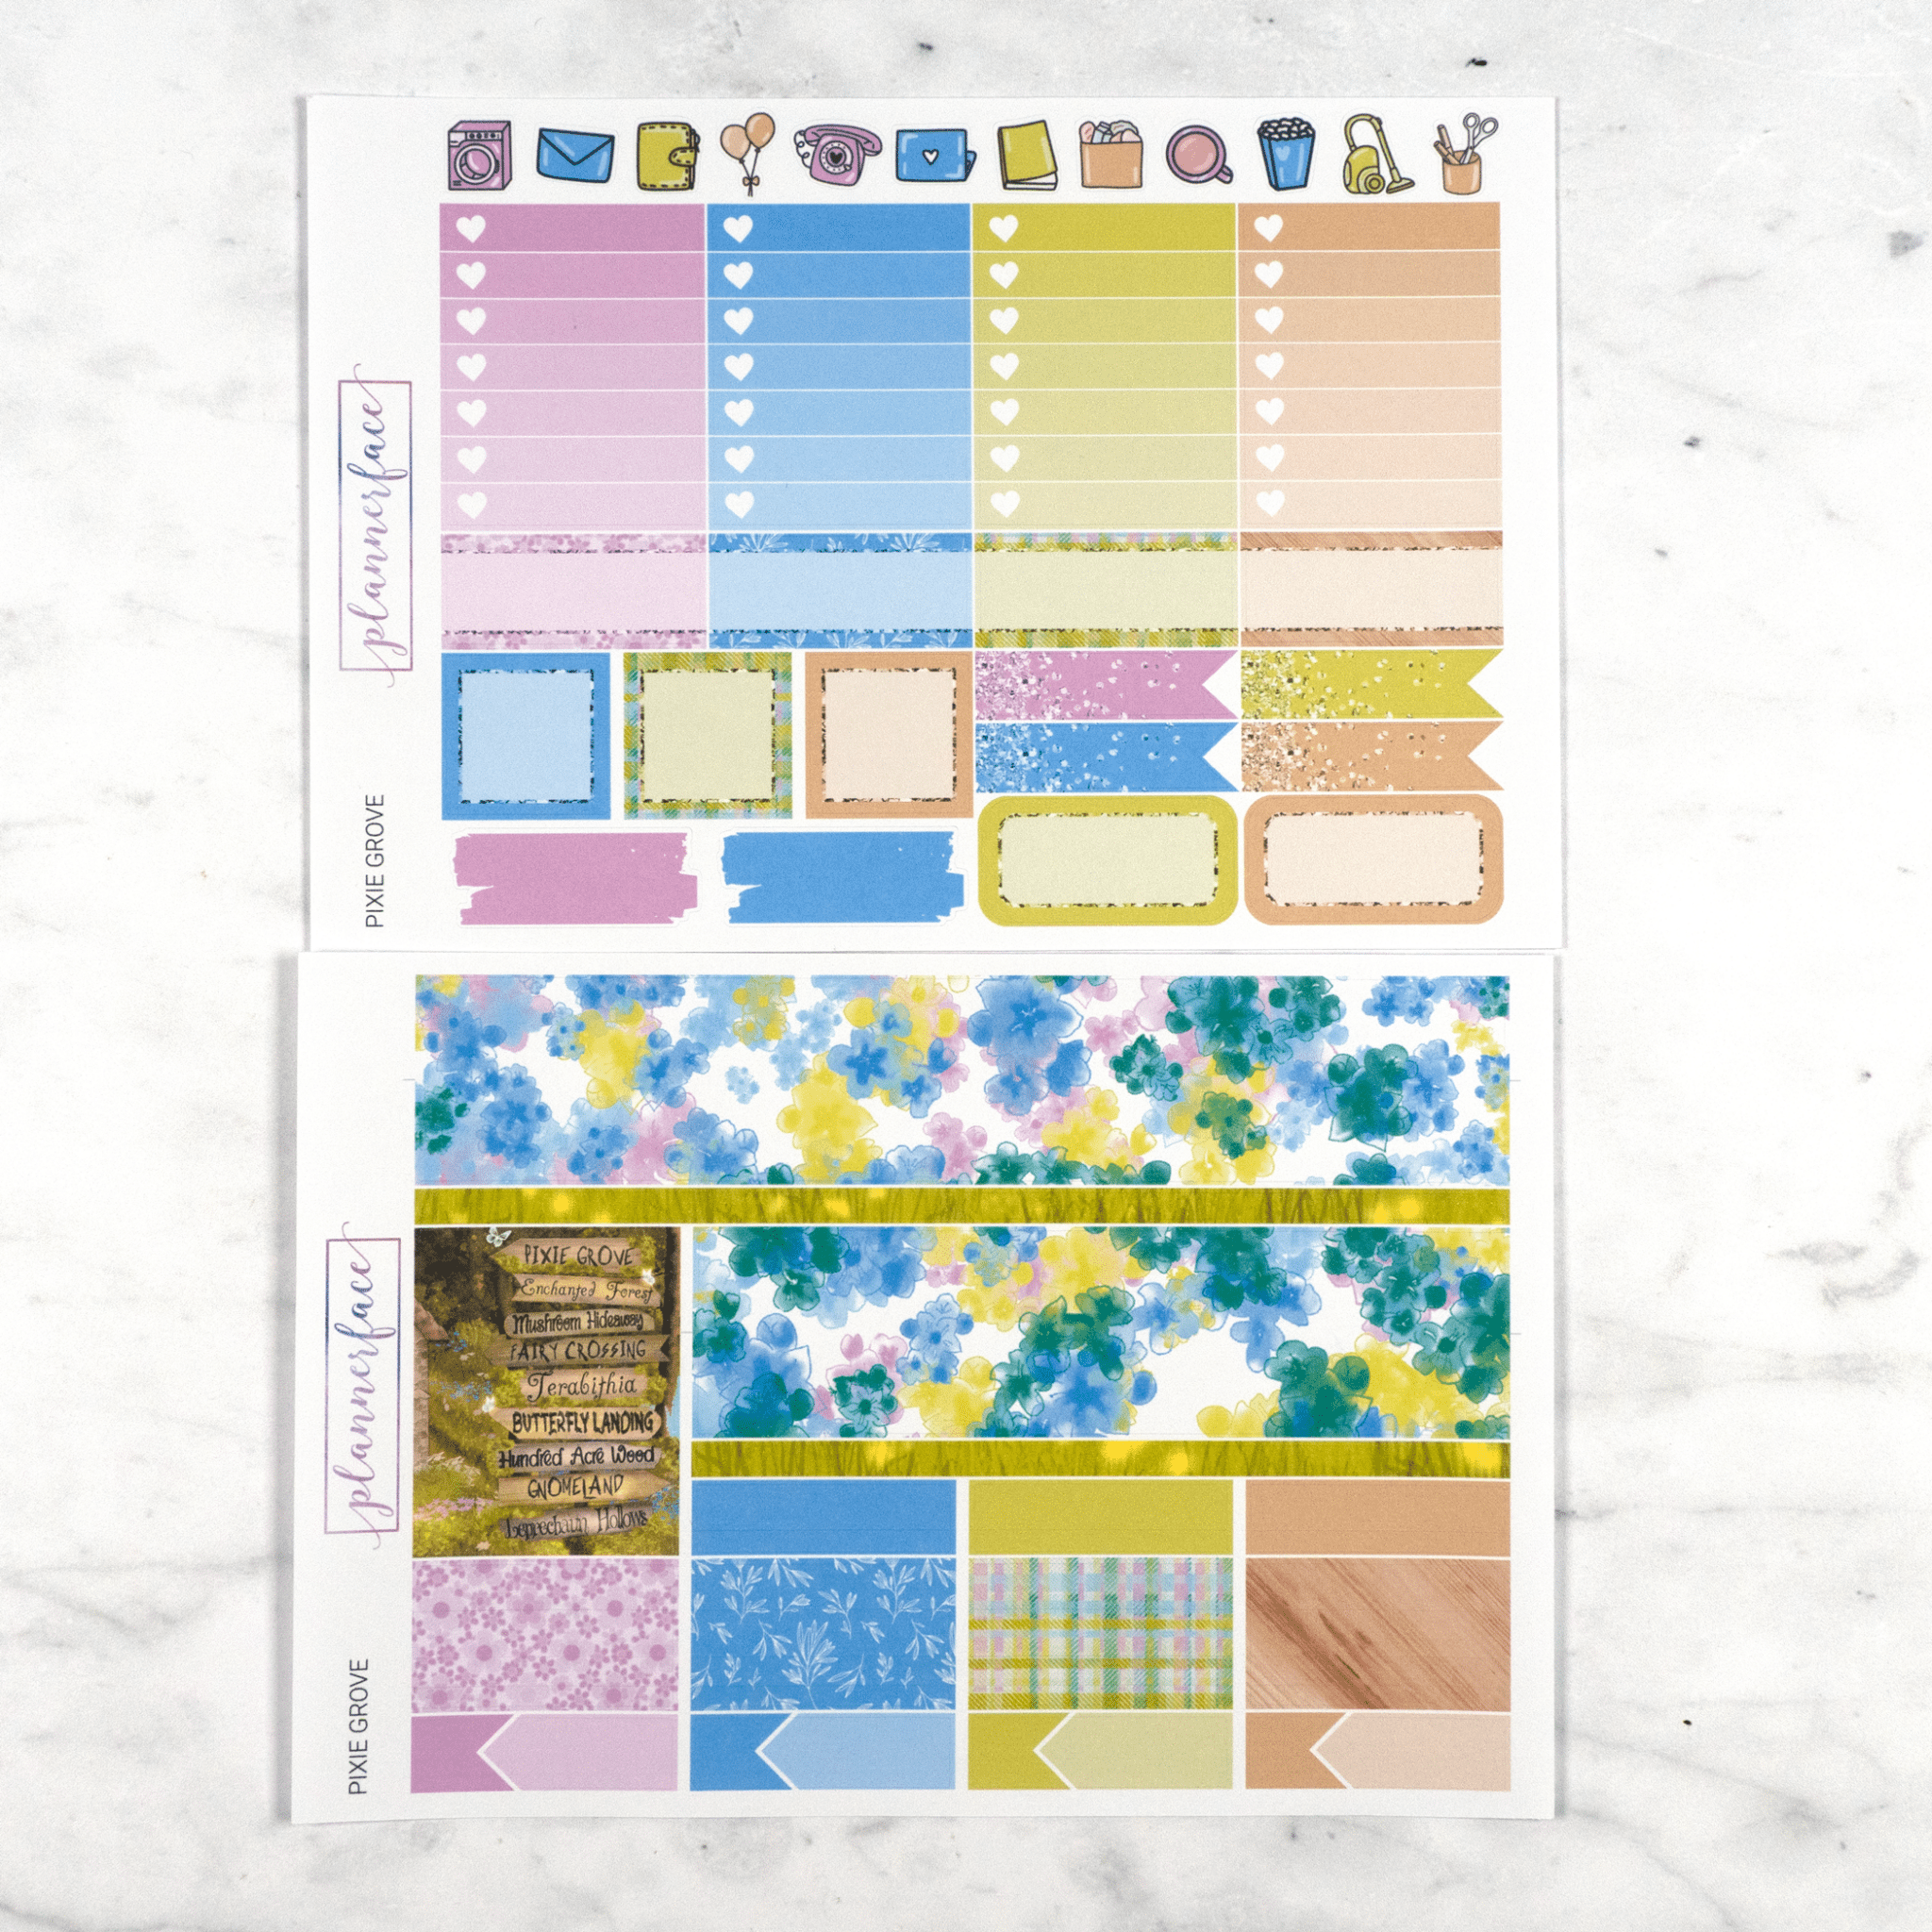 Pixie Grove Weekly Kit by Plannerface